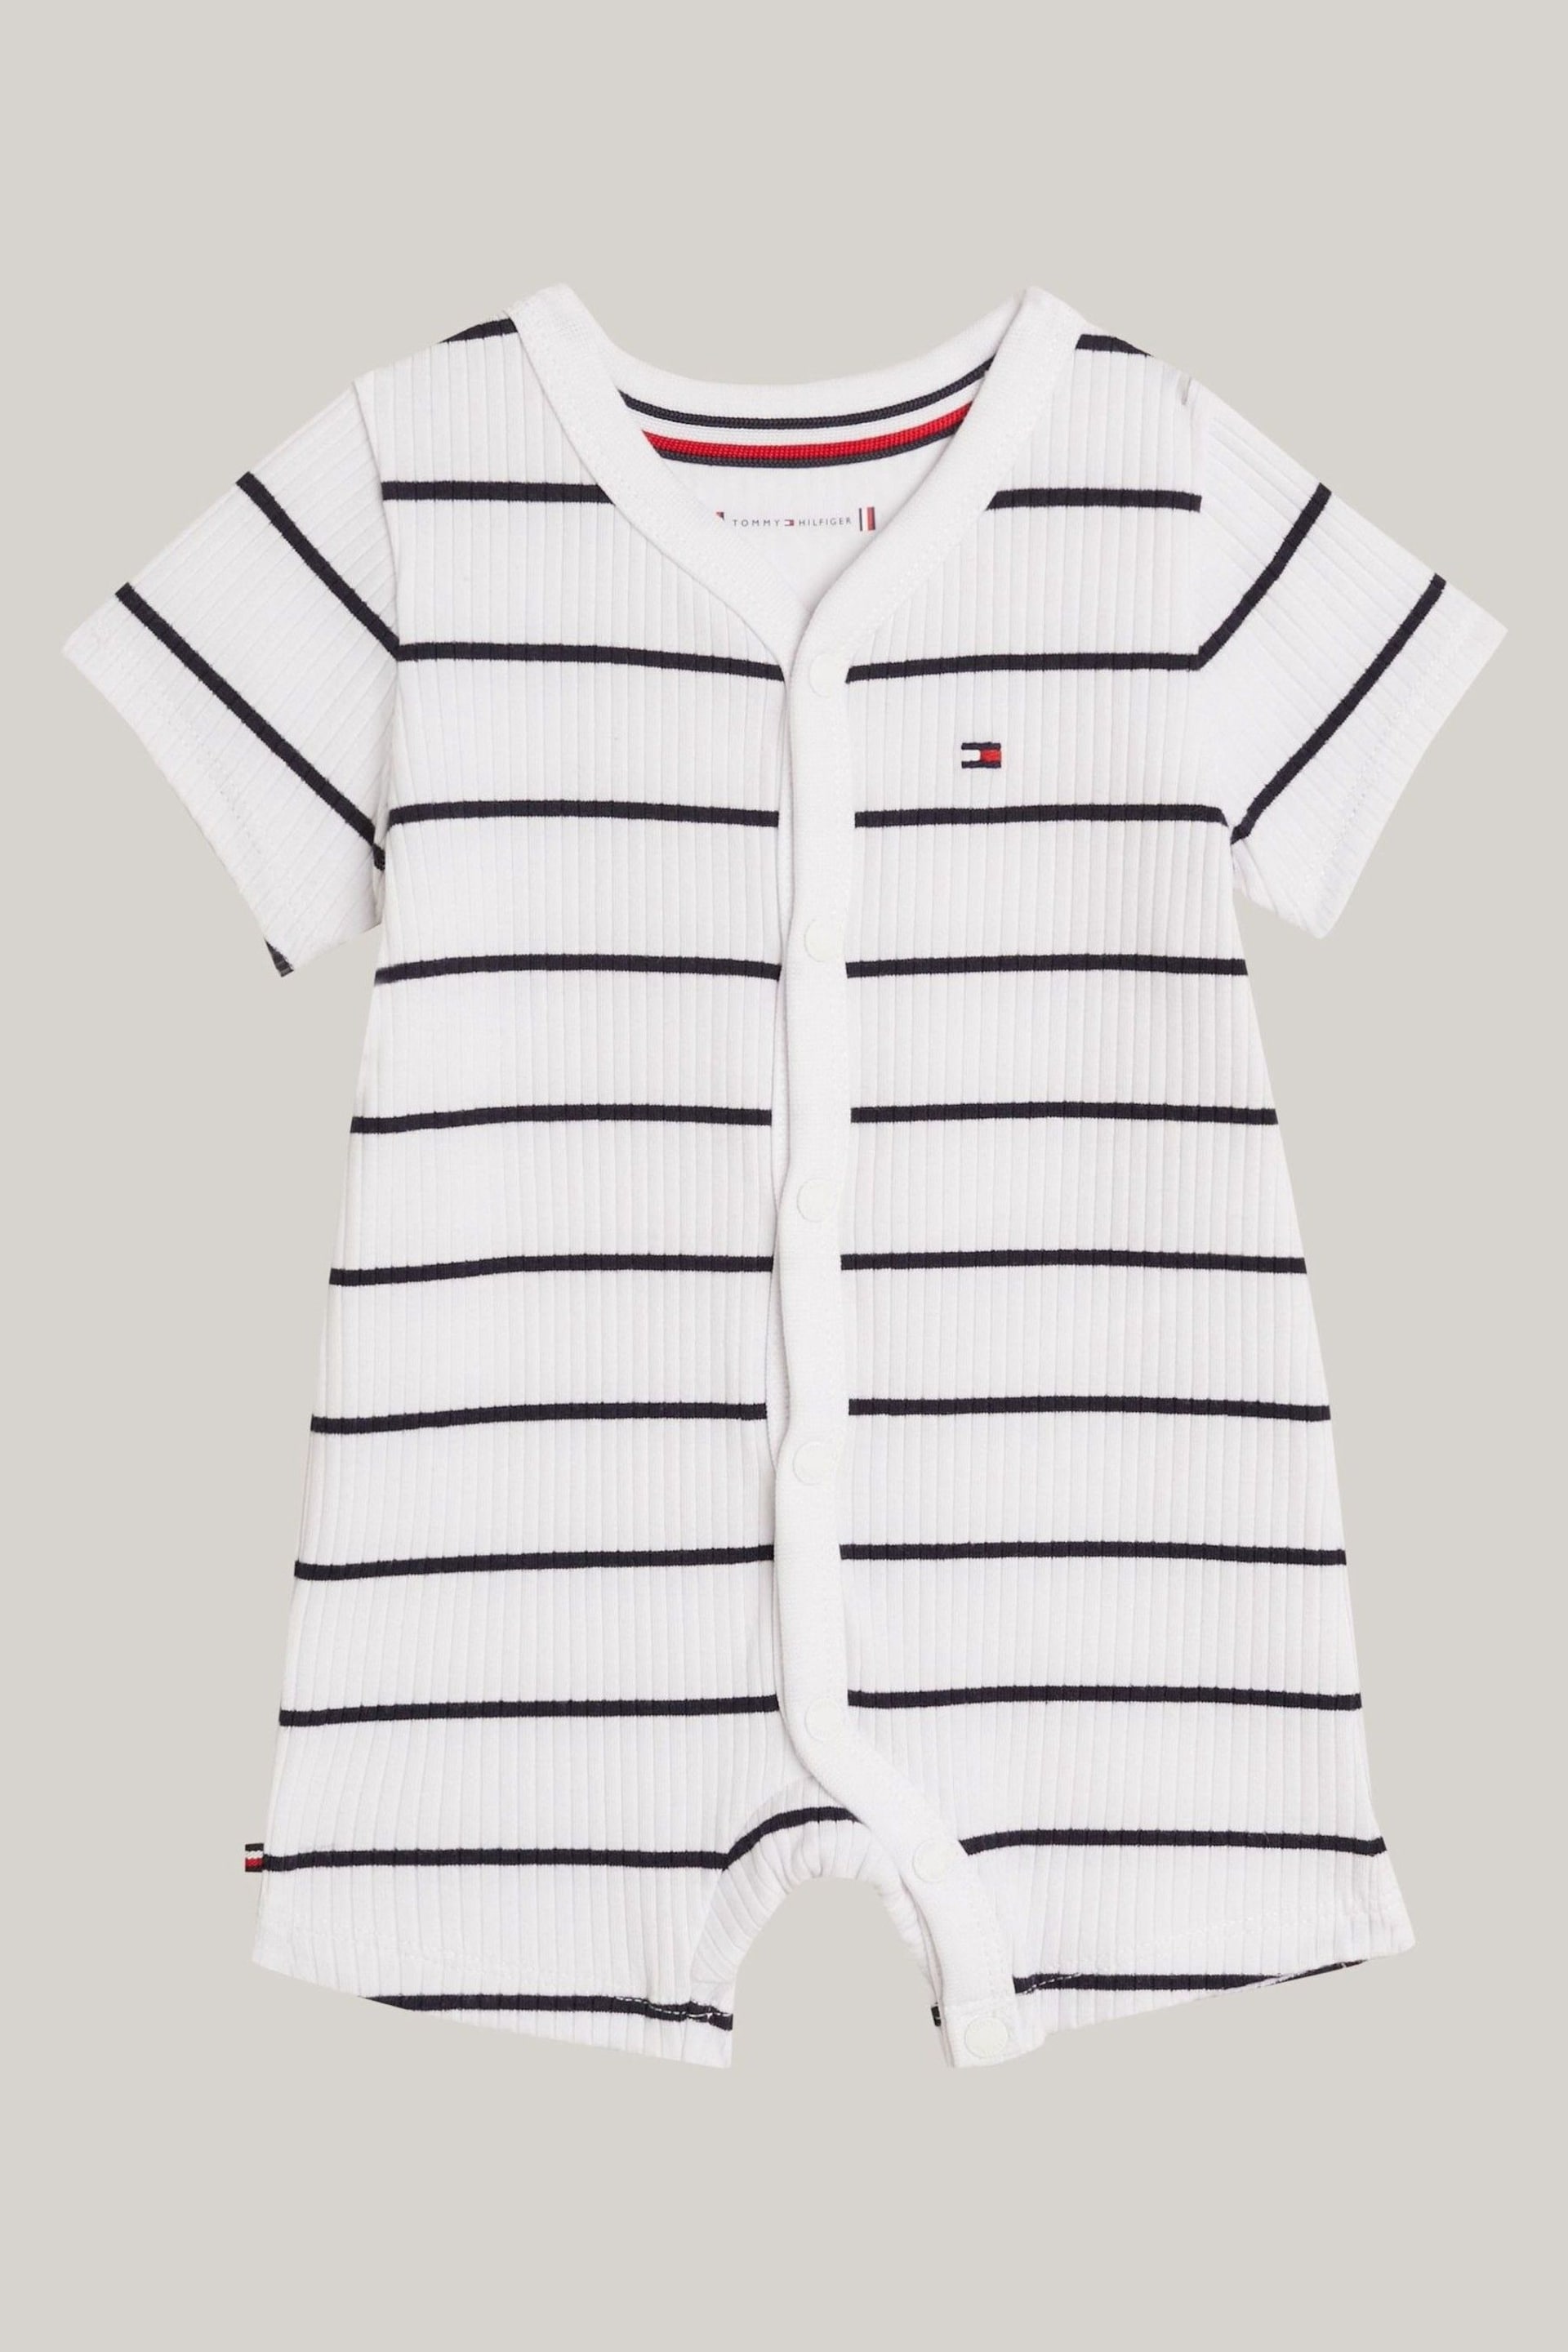 Tommy Hilfiger Baby Blue Striped Rib Shortall All In One - Image 1 of 3